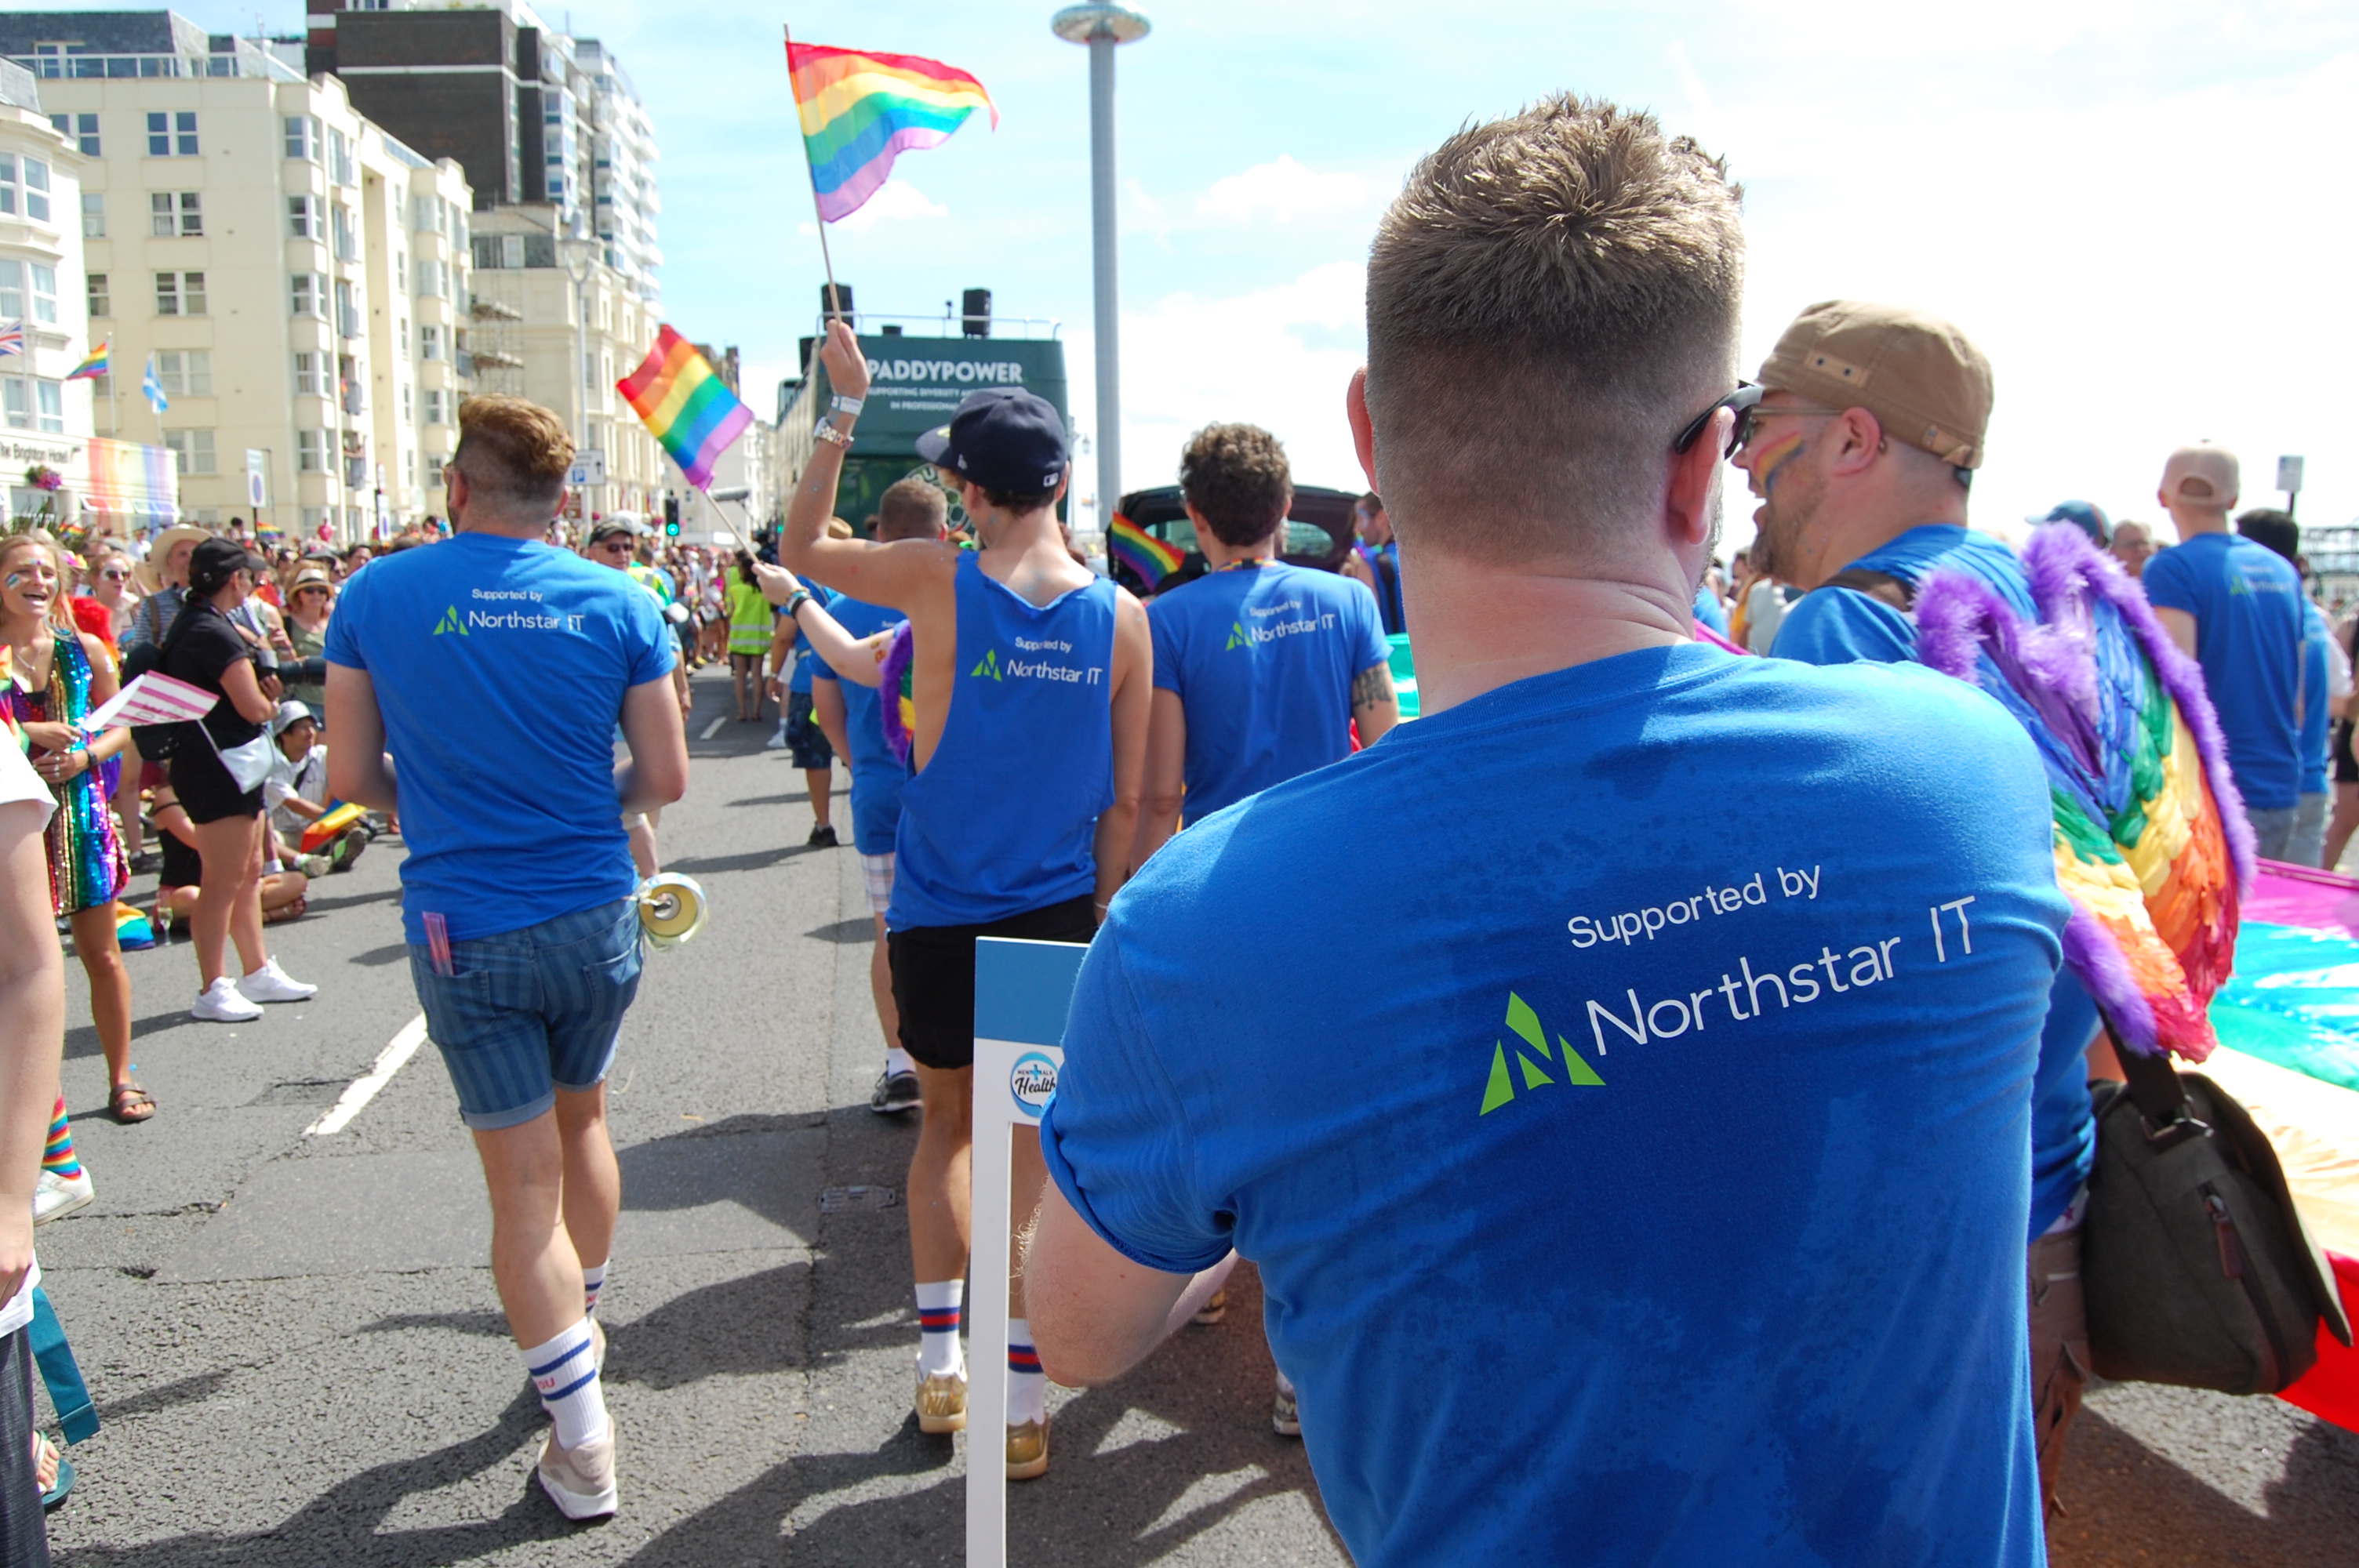 Northstar IT team supporting MenTalkHealth UK charity at Brighton Pride 2019.